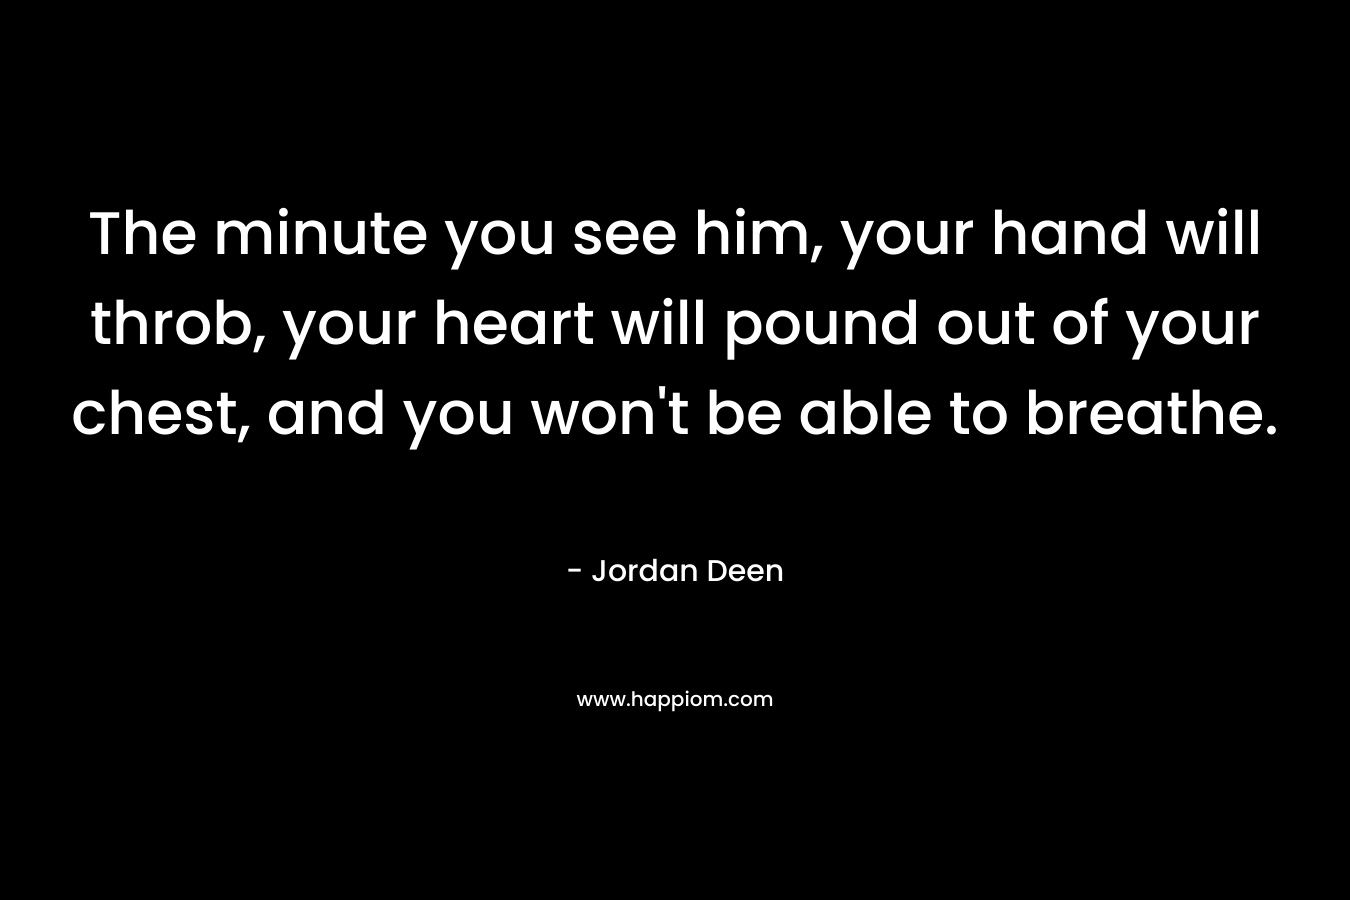 The minute you see him, your hand will throb, your heart will pound out of your chest, and you won't be able to breathe.